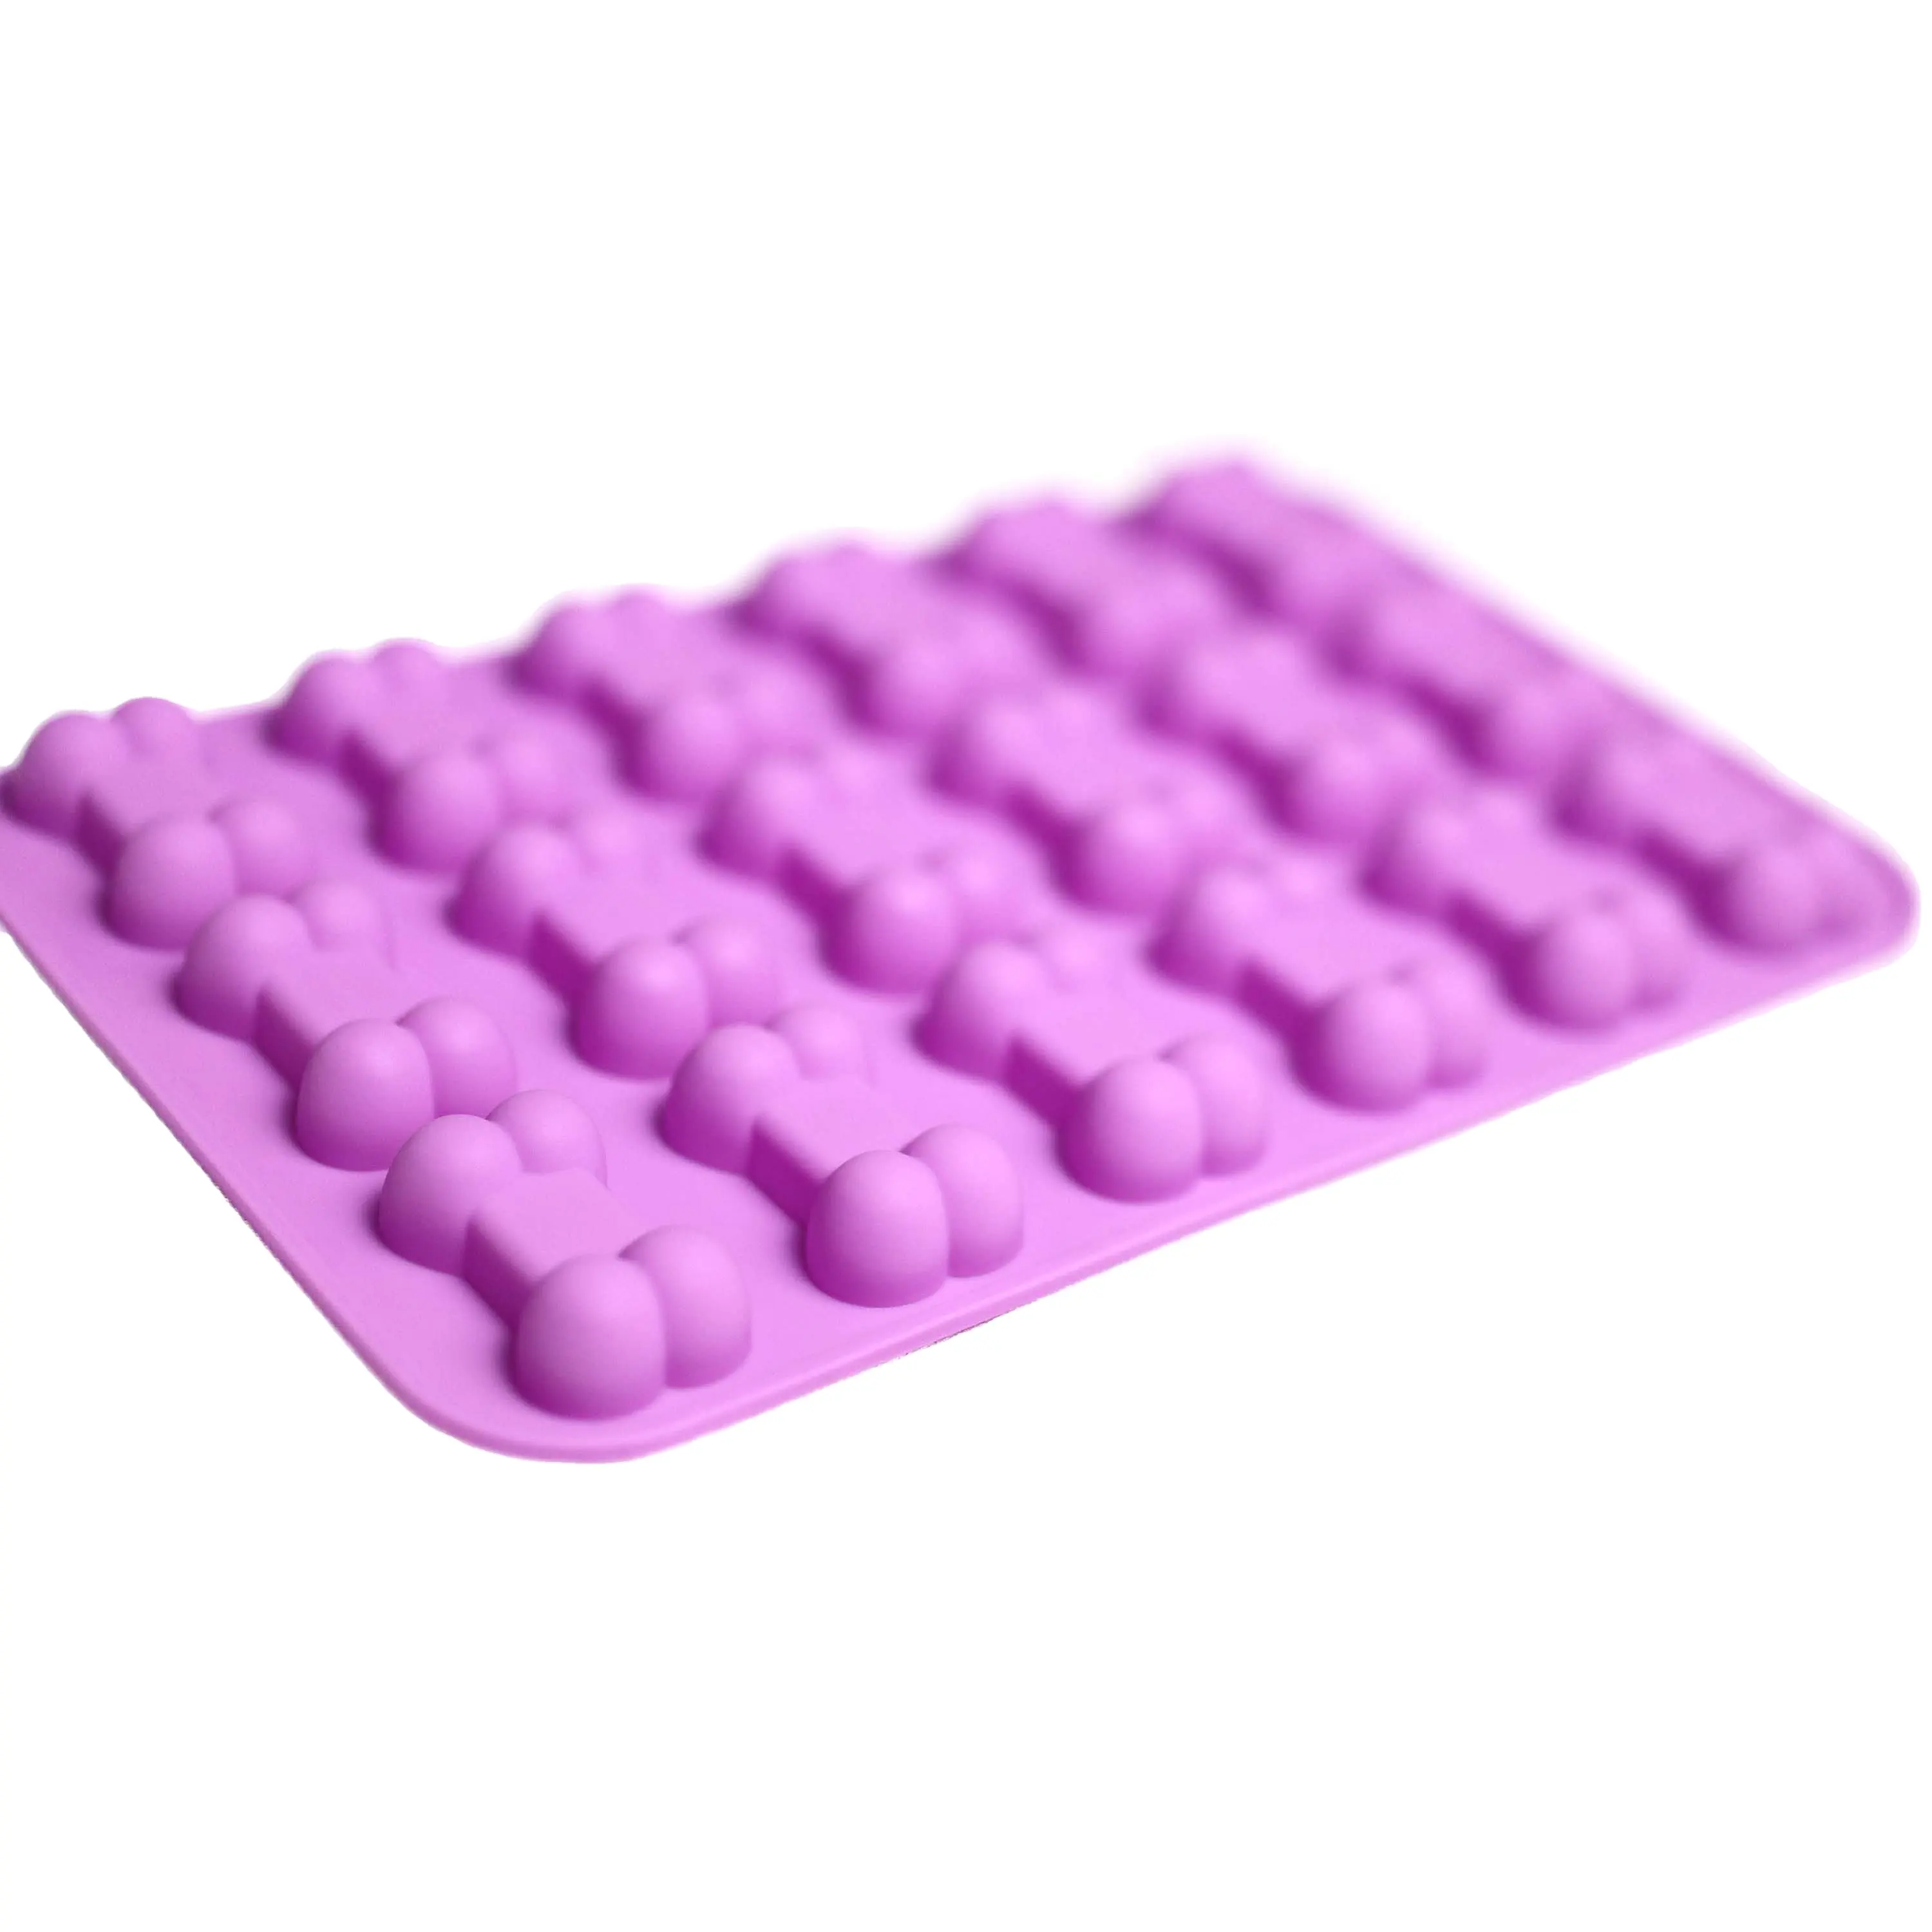 Silicone Mould New Style Food Grade Silicone Chocolate Mold Bread Cake Tools Baking Silicone Rubber Molds